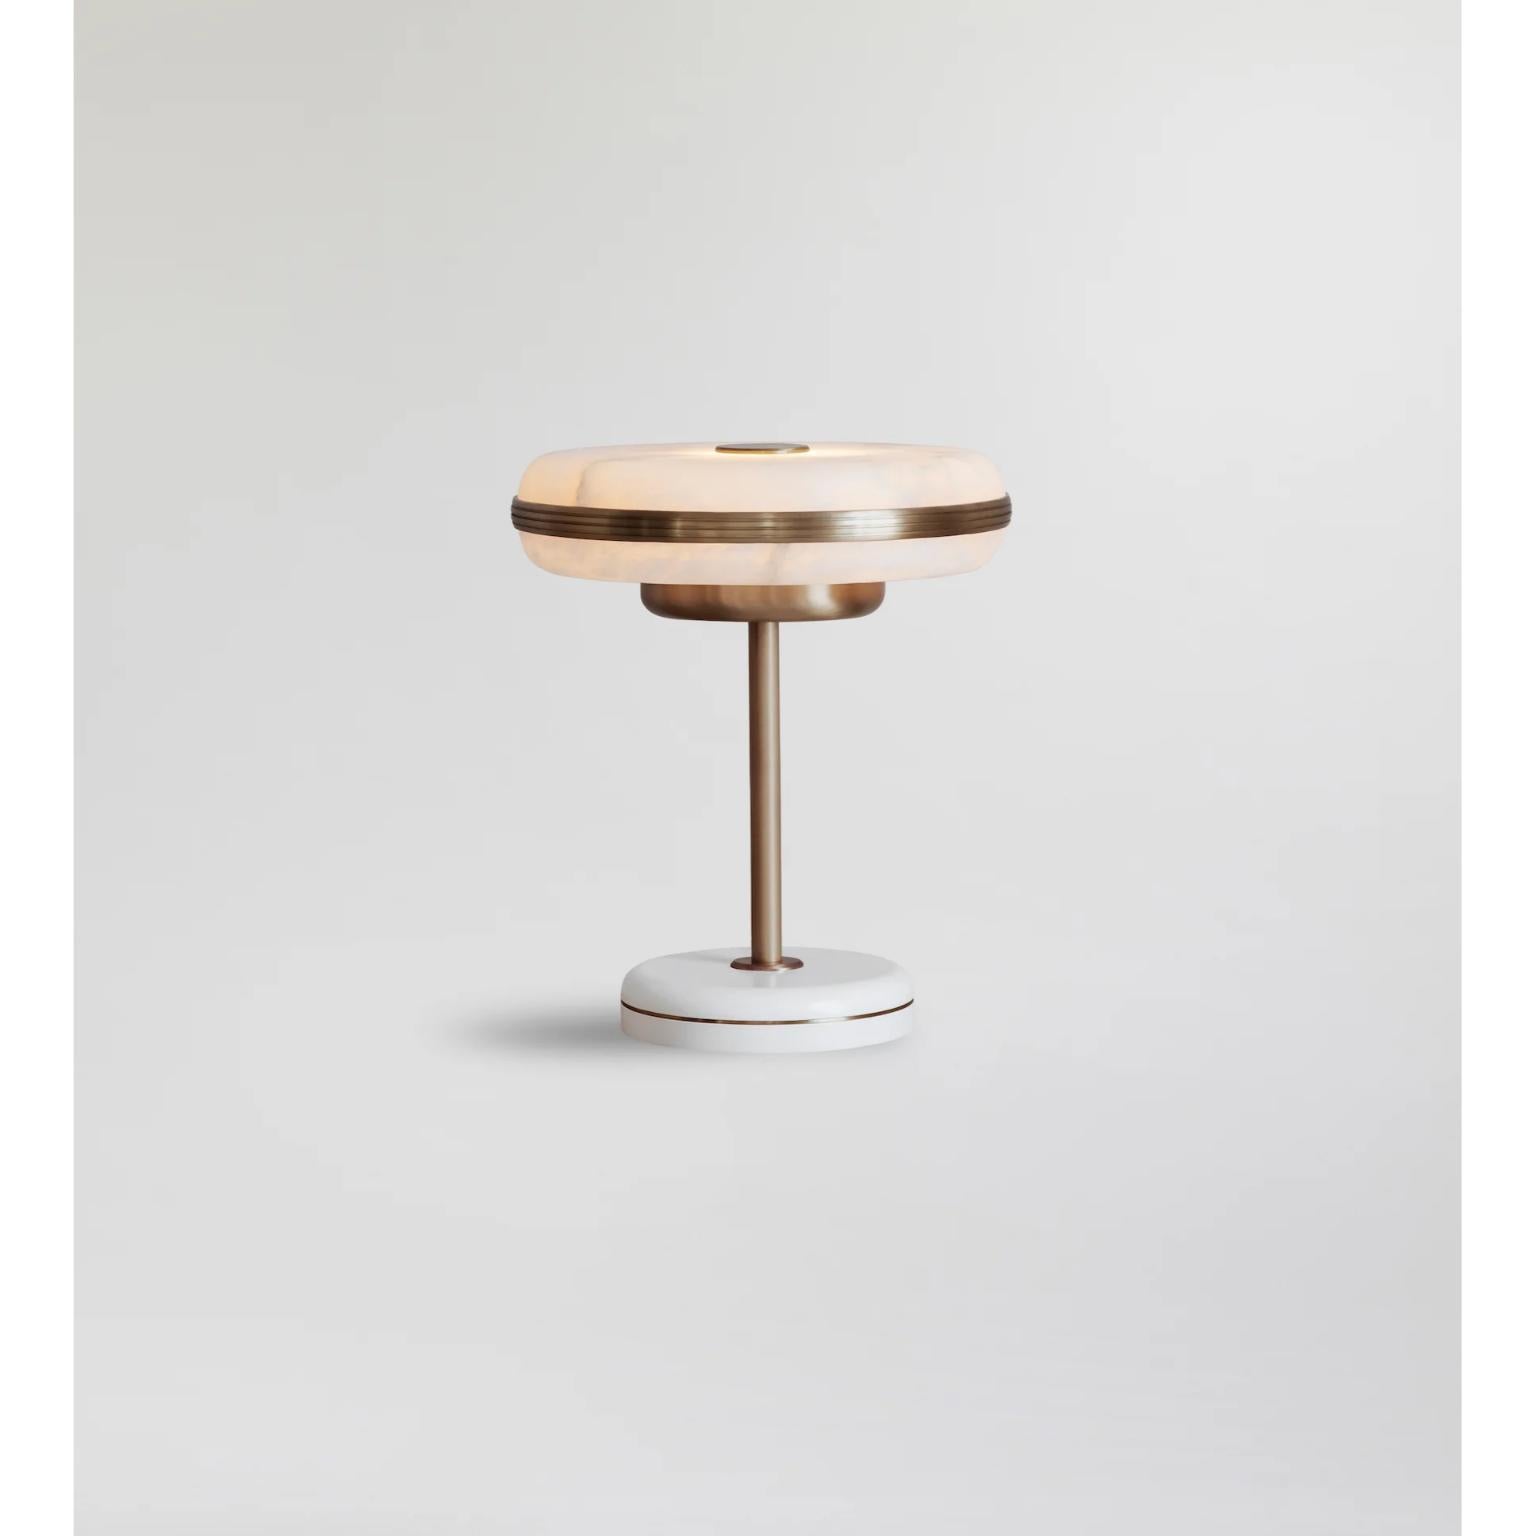 Beran Antique Brass Small Table Lamp by Bert Frank
Dimensions: Ø 26 x H 28 cm.
Materials: Brass and alabaster.
Base finish: Satin white.

Available in two different sizes. Available in different finishes and materials. Please contact us. 

The